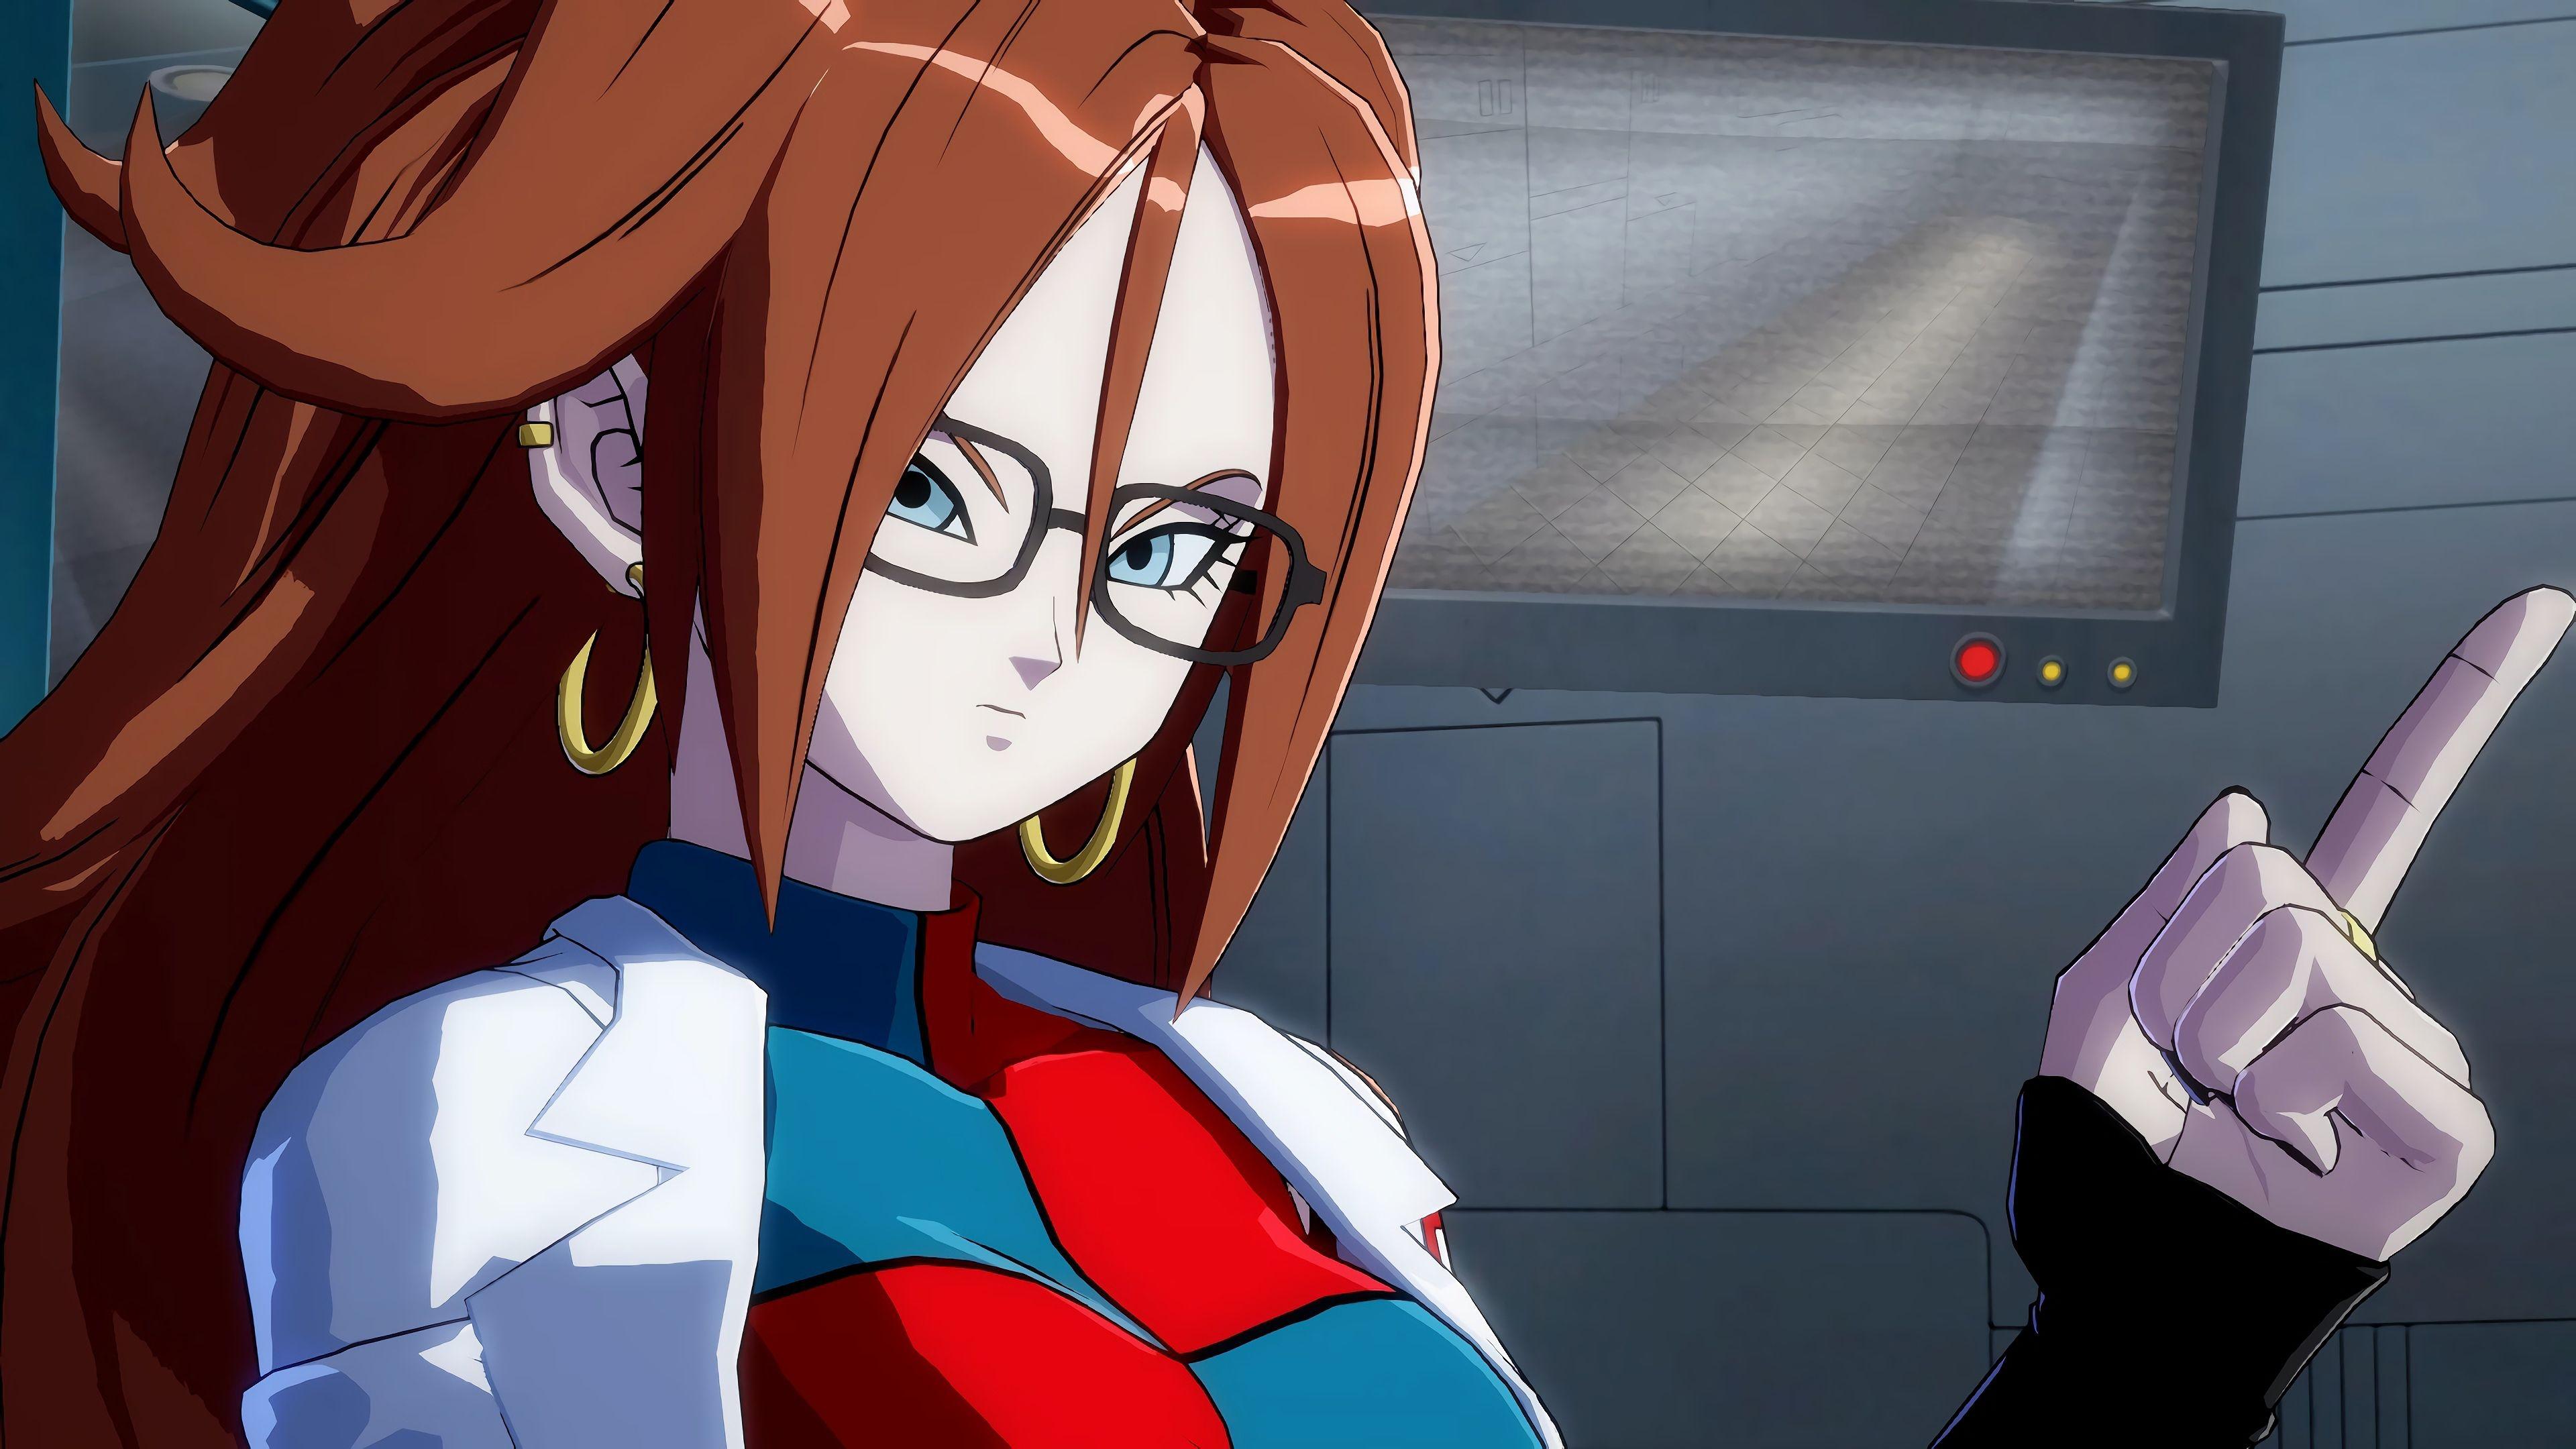 Android 21 BALL FighterZ